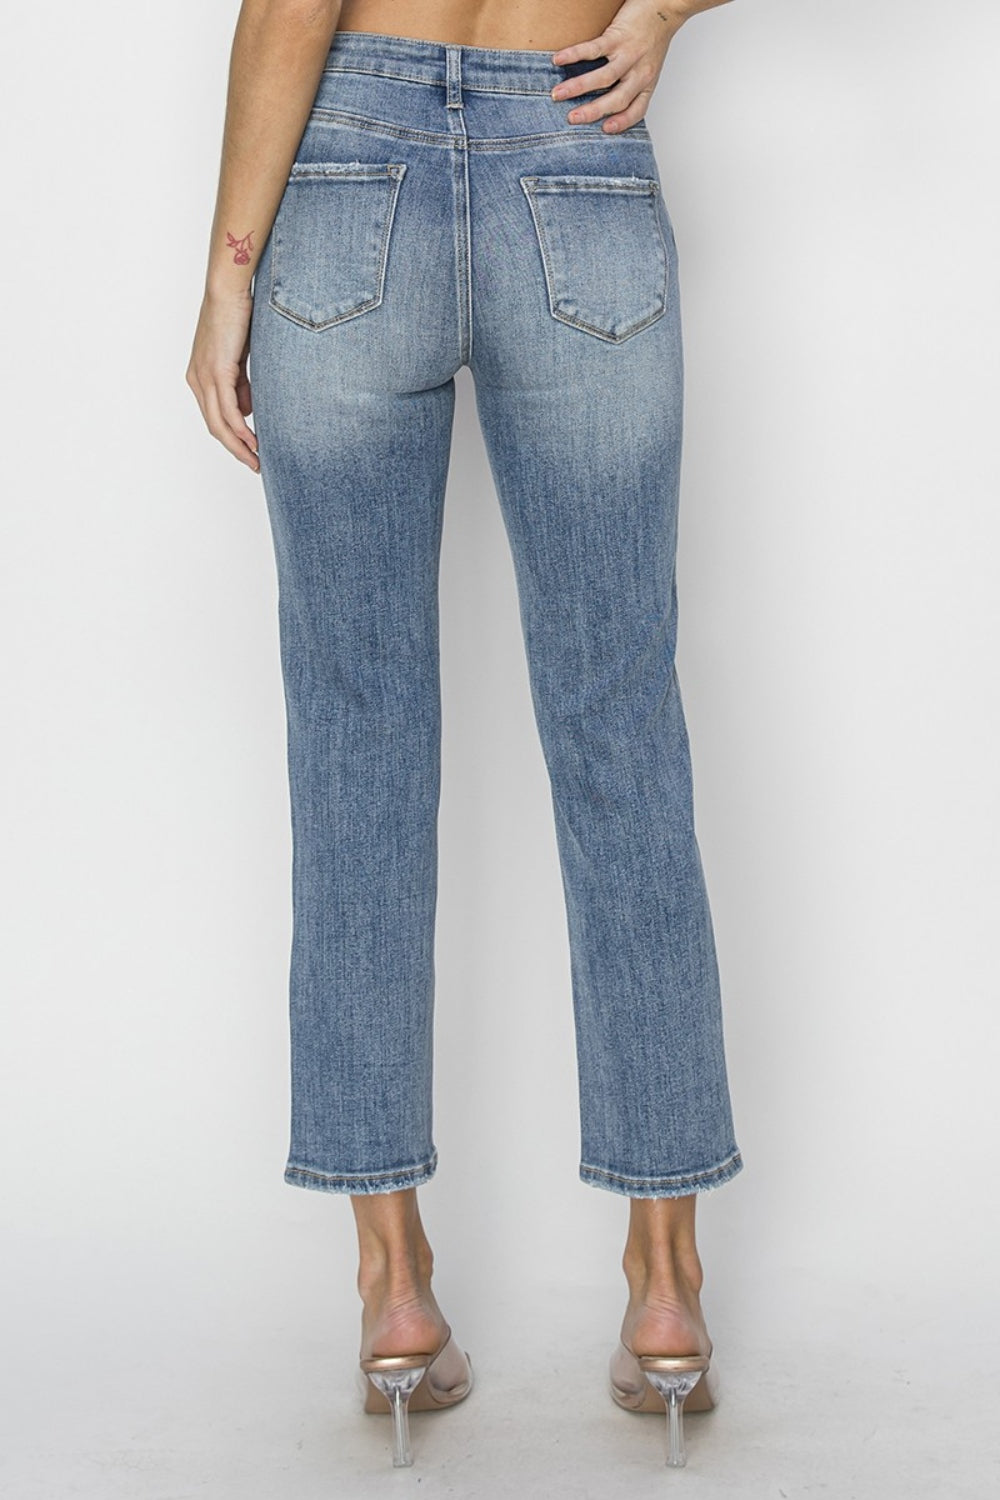 RISEN High Rise Cropped Jeans - Inspired Eye Boutique